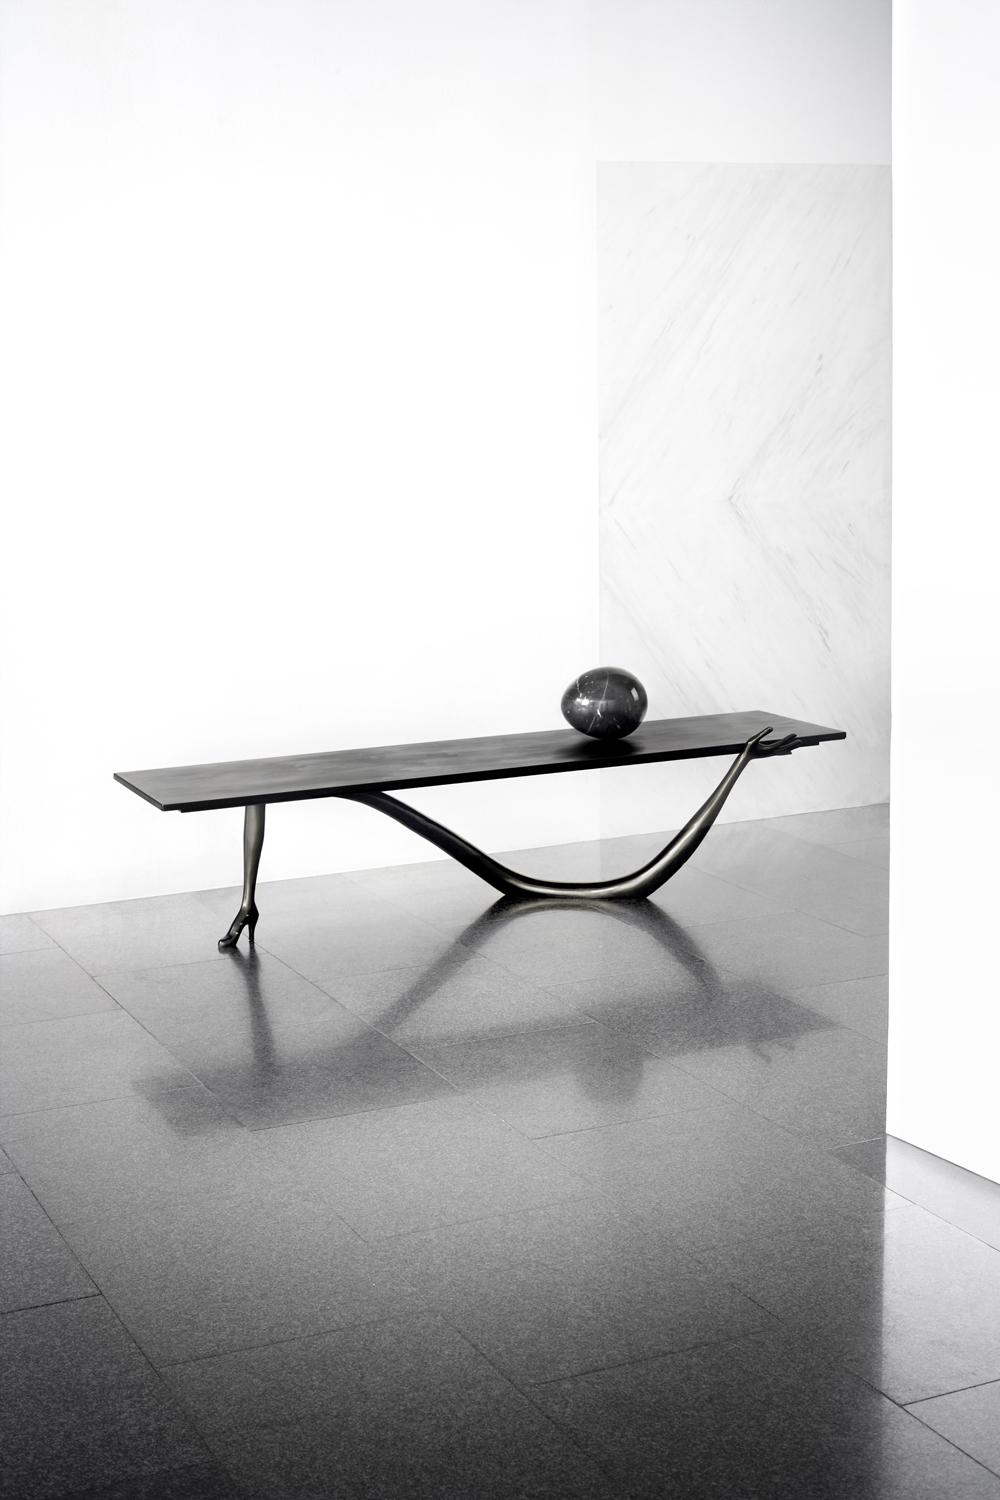 Leda Blacklabel low table, Limited Edition, Salvador Dalí
Limited to 105 Pieces
Design inspired on an artwork by Salvador Dalí
Dimensions: 51 x 190 x 61 H cm
Materials: Brass, marble

Design inspired on an artwork by Salvador Dalí: ‘Femme à